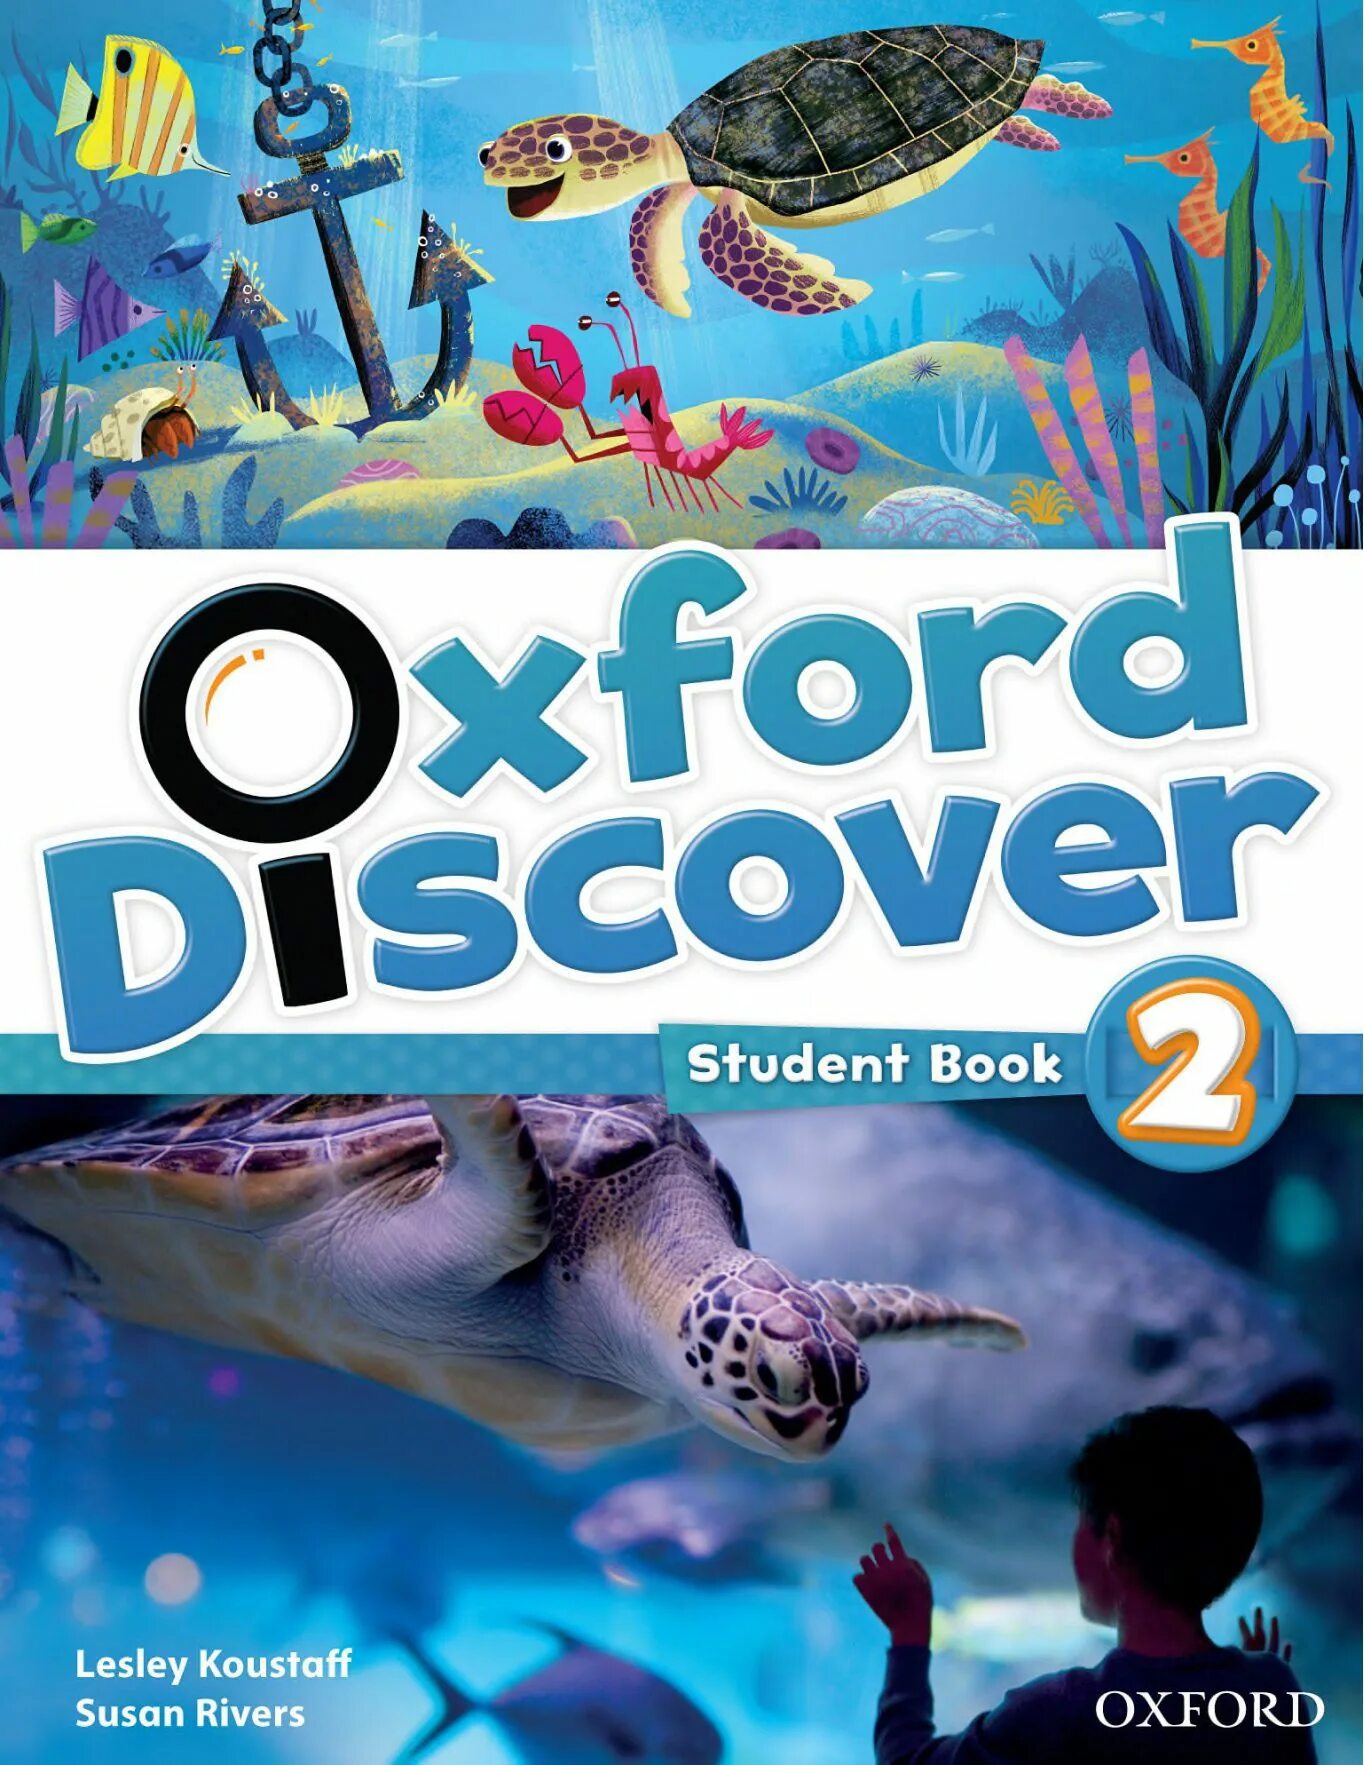 Oxford discover 2nd Edition. Oxford Discovery 2. Oxford Discovery student's book. Oxford discover 1 student book. Oxford student s book